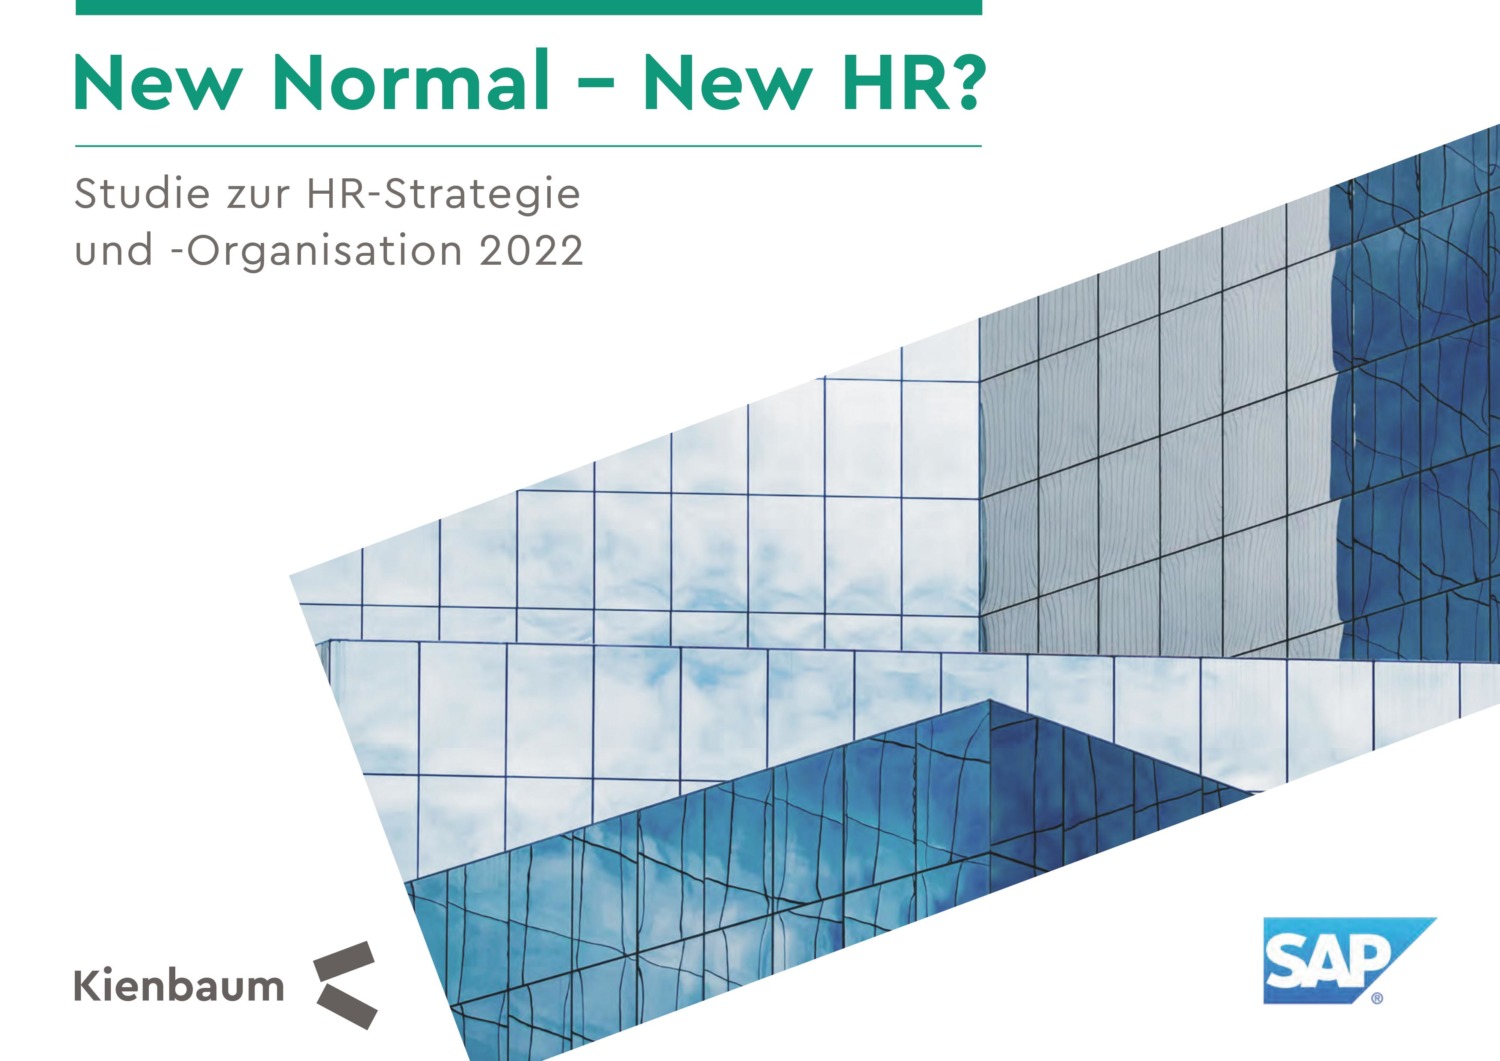 New Normal - New HR?